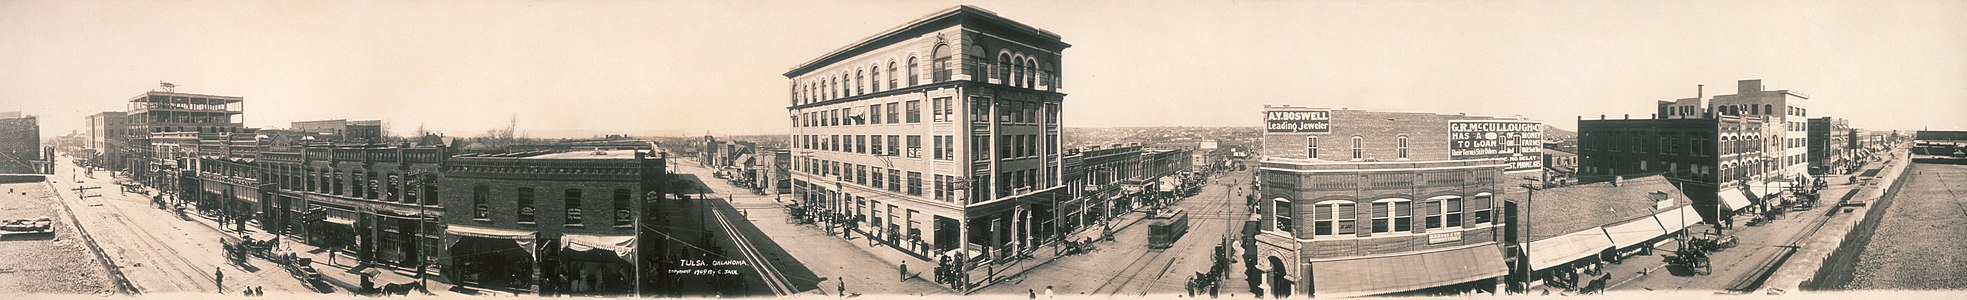 Tulsa in 1909, by Clarence Jack (edited by Mfield)